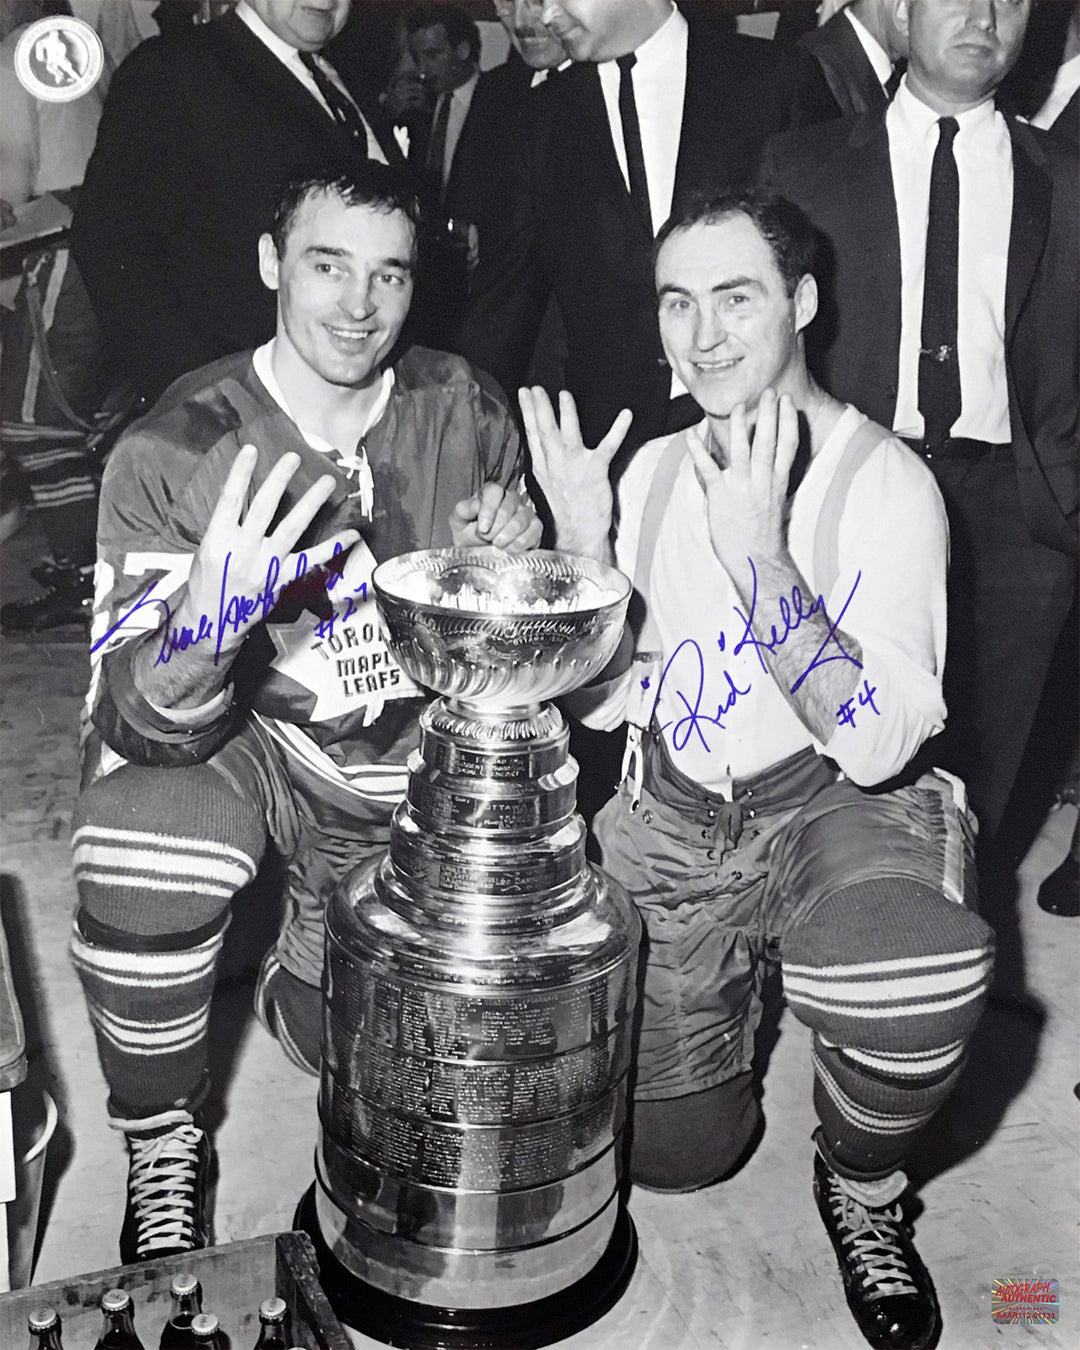 Frank Mahovlich Autographed 11X14 Photo Toronto Maple Leafs, Toronto Maple Leafs, NHL, Hockey, Autographed, Signed, AAHPH31557